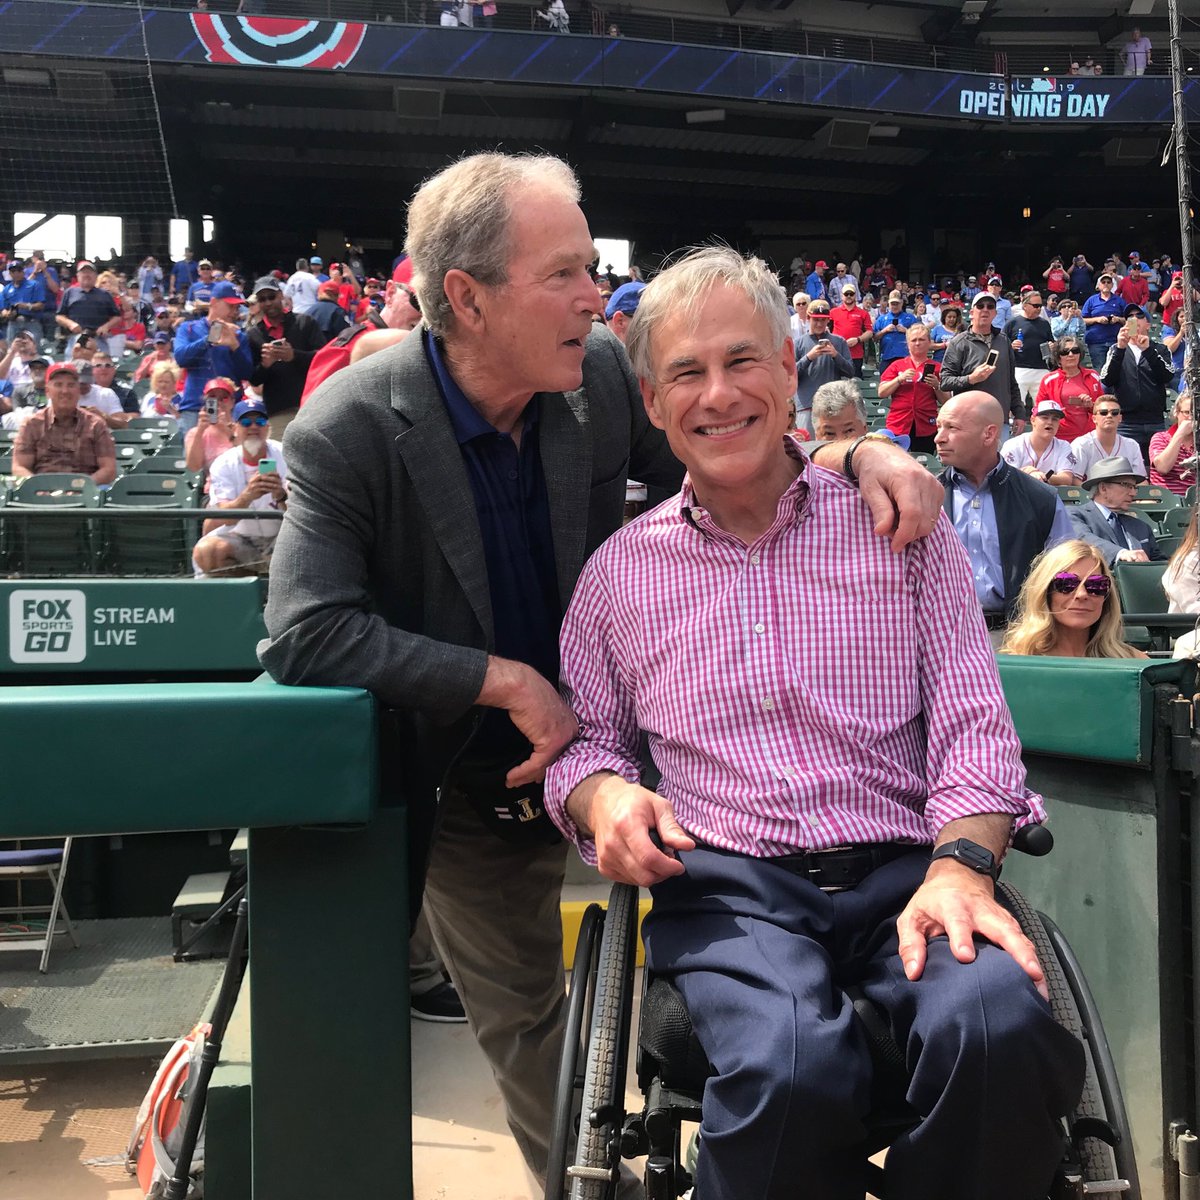 Are Greg Abbott And George Bush Related?